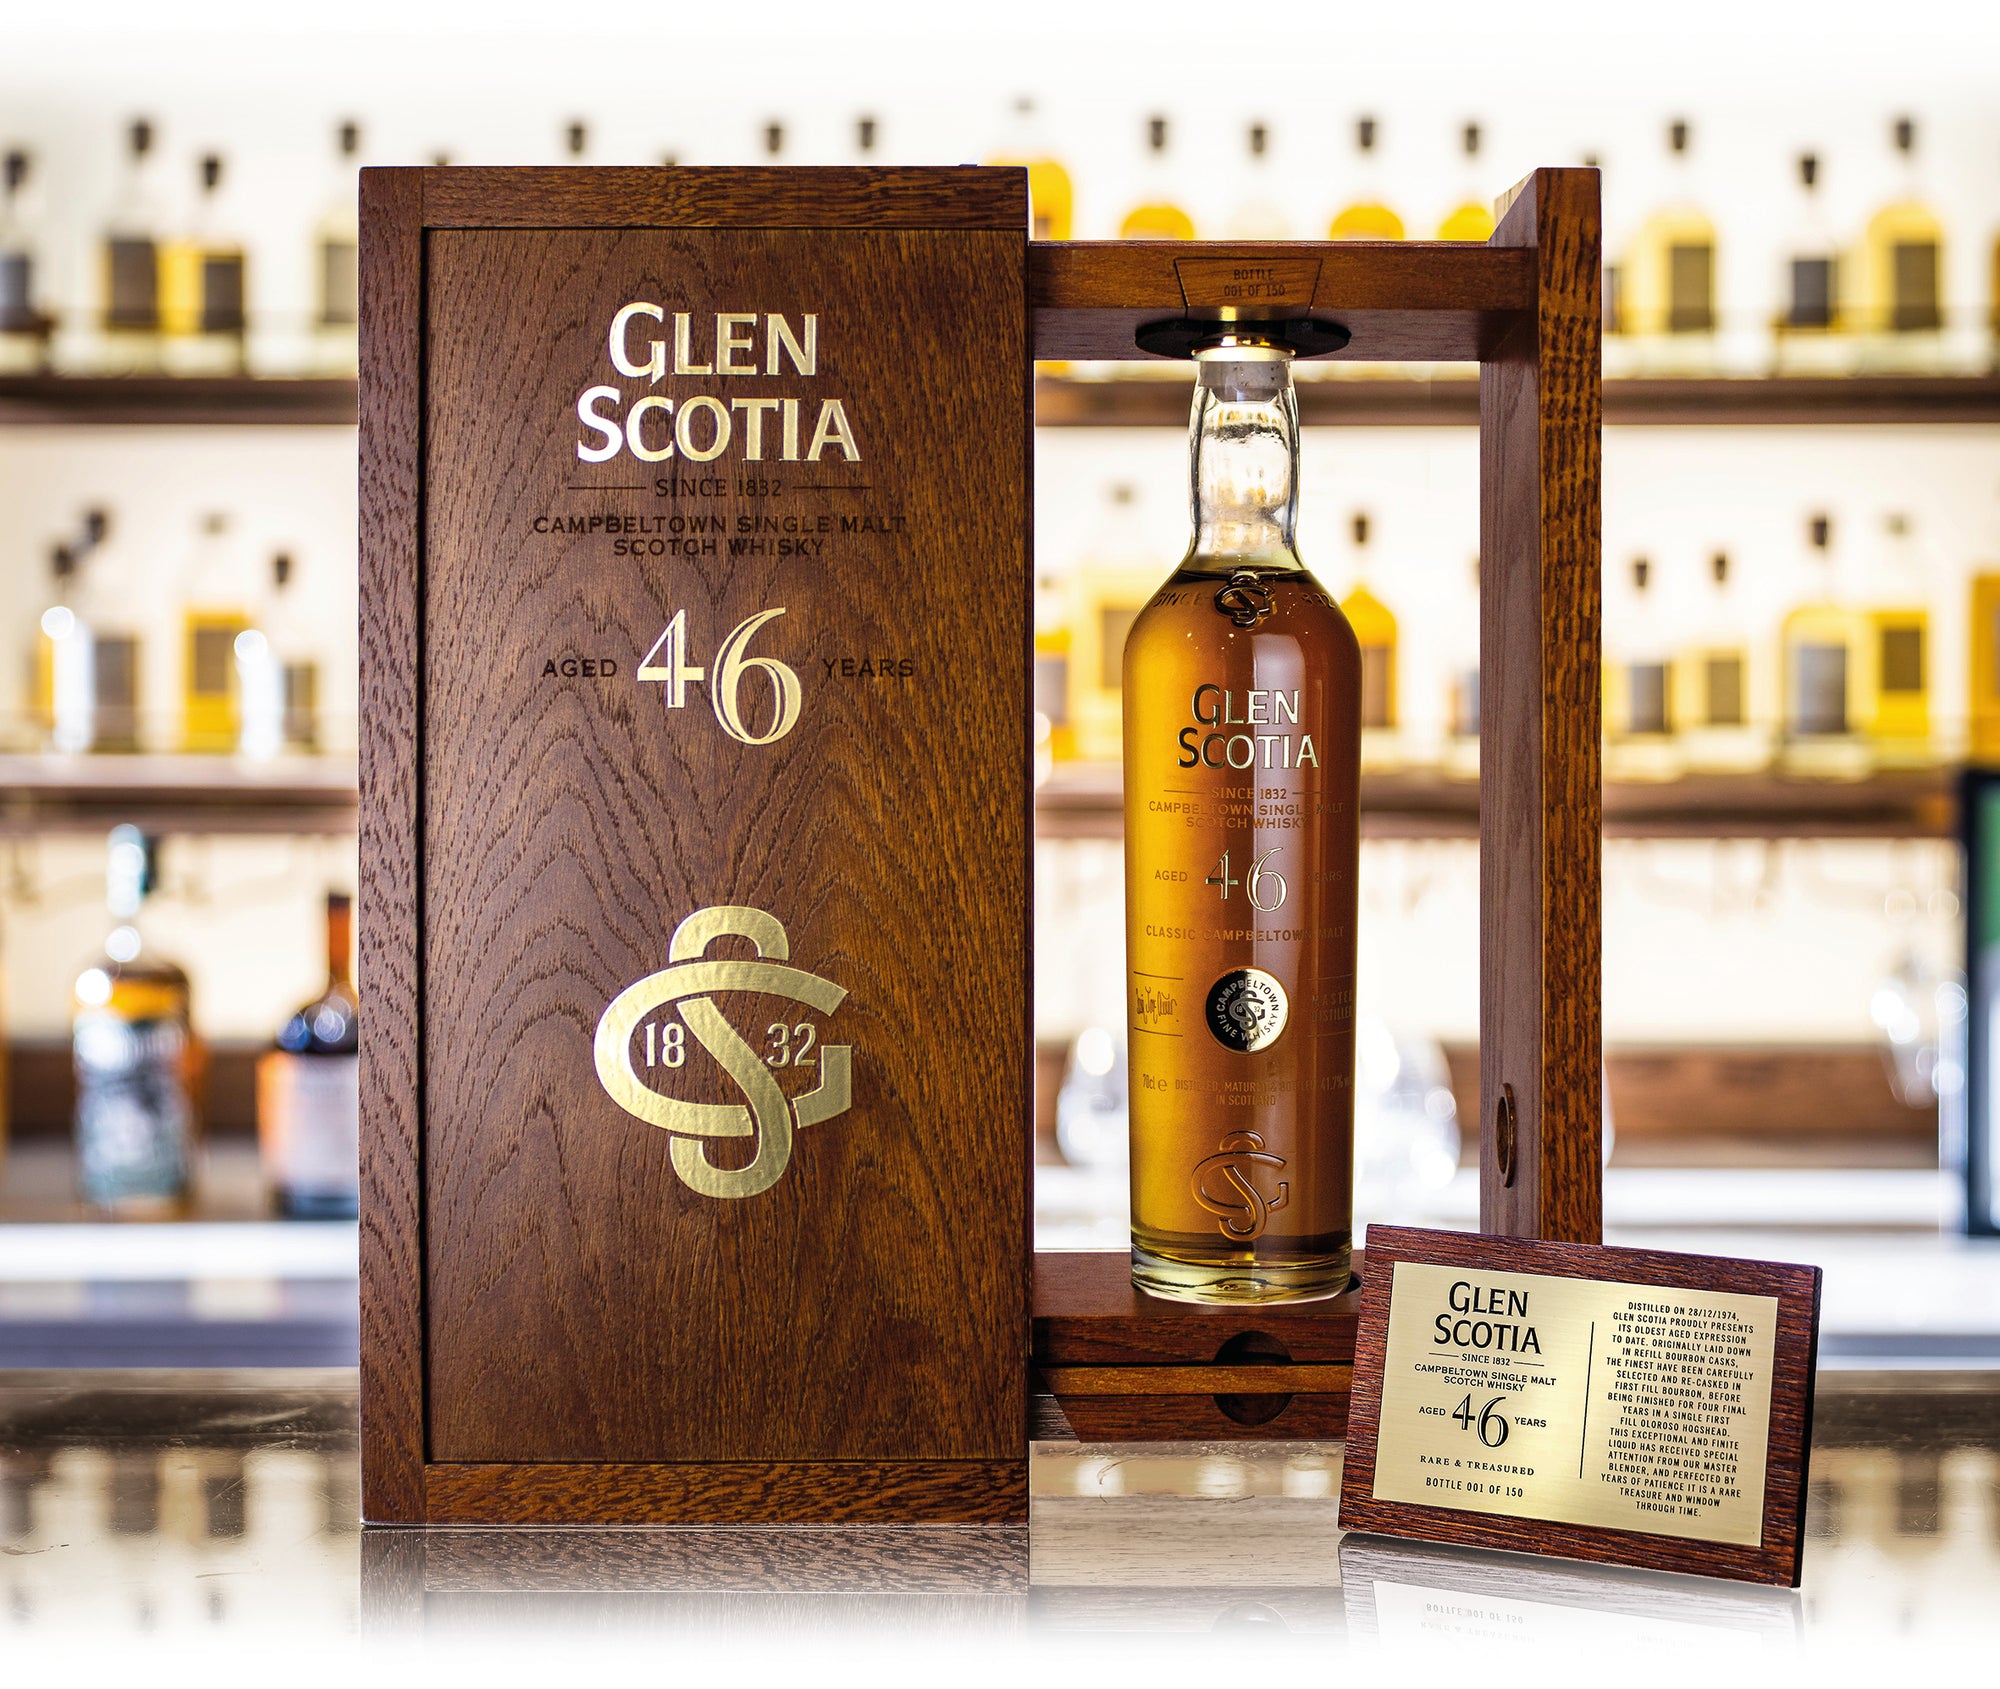 Introducing our Oldest Release to Date: Glen Scotia 46 Year Old